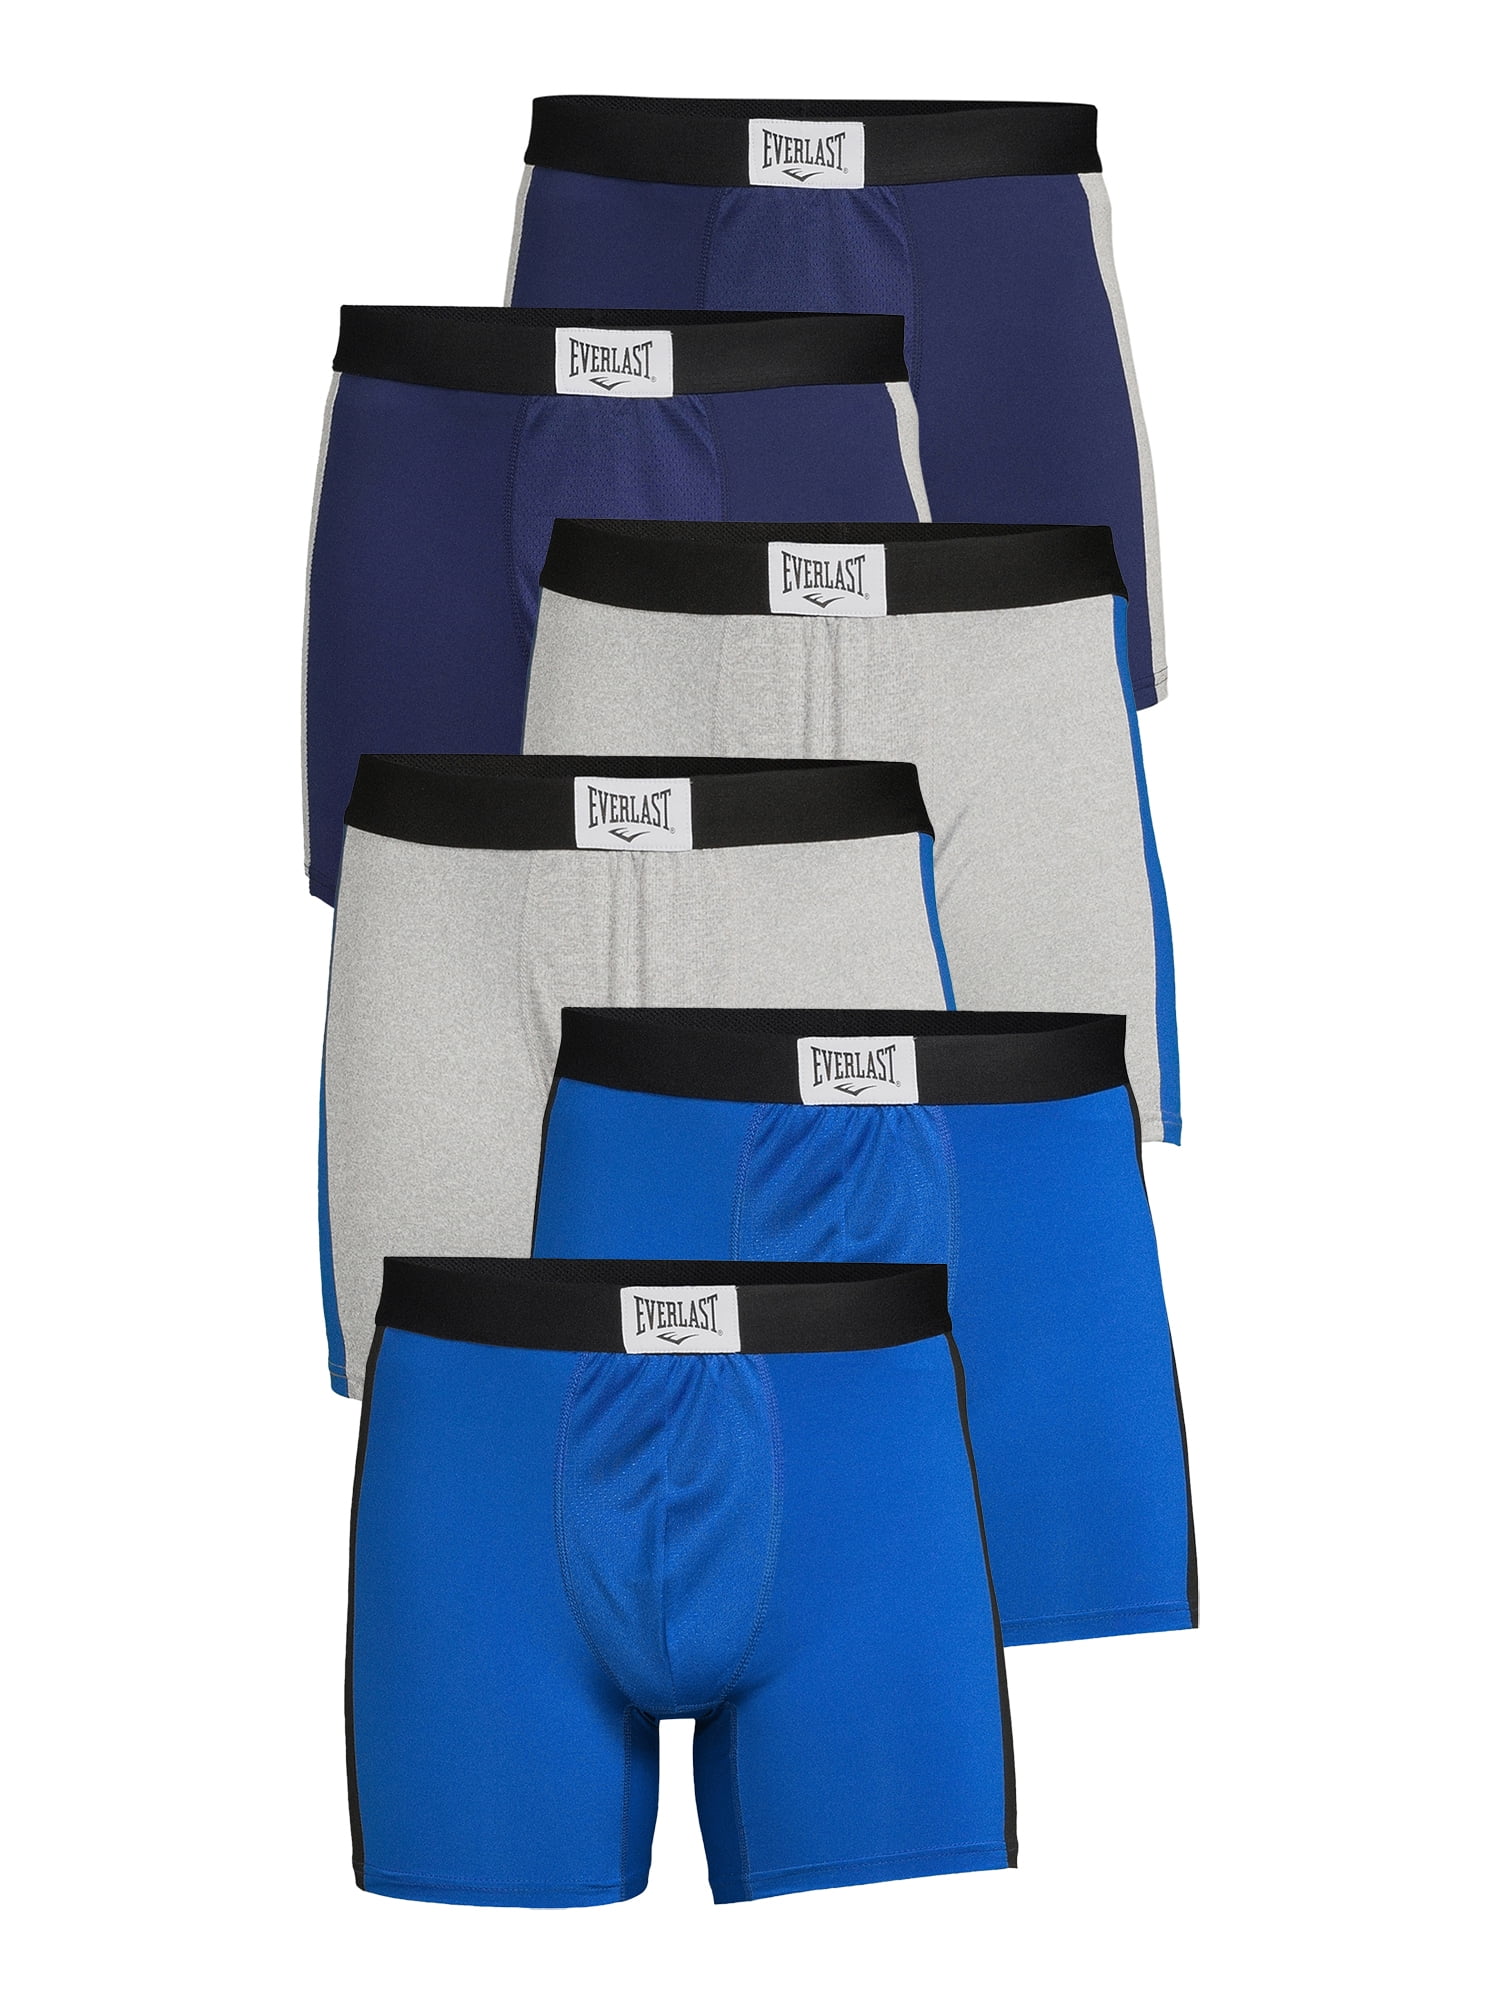 Find more Everlast Underwear Medium New for sale at up to 90% off